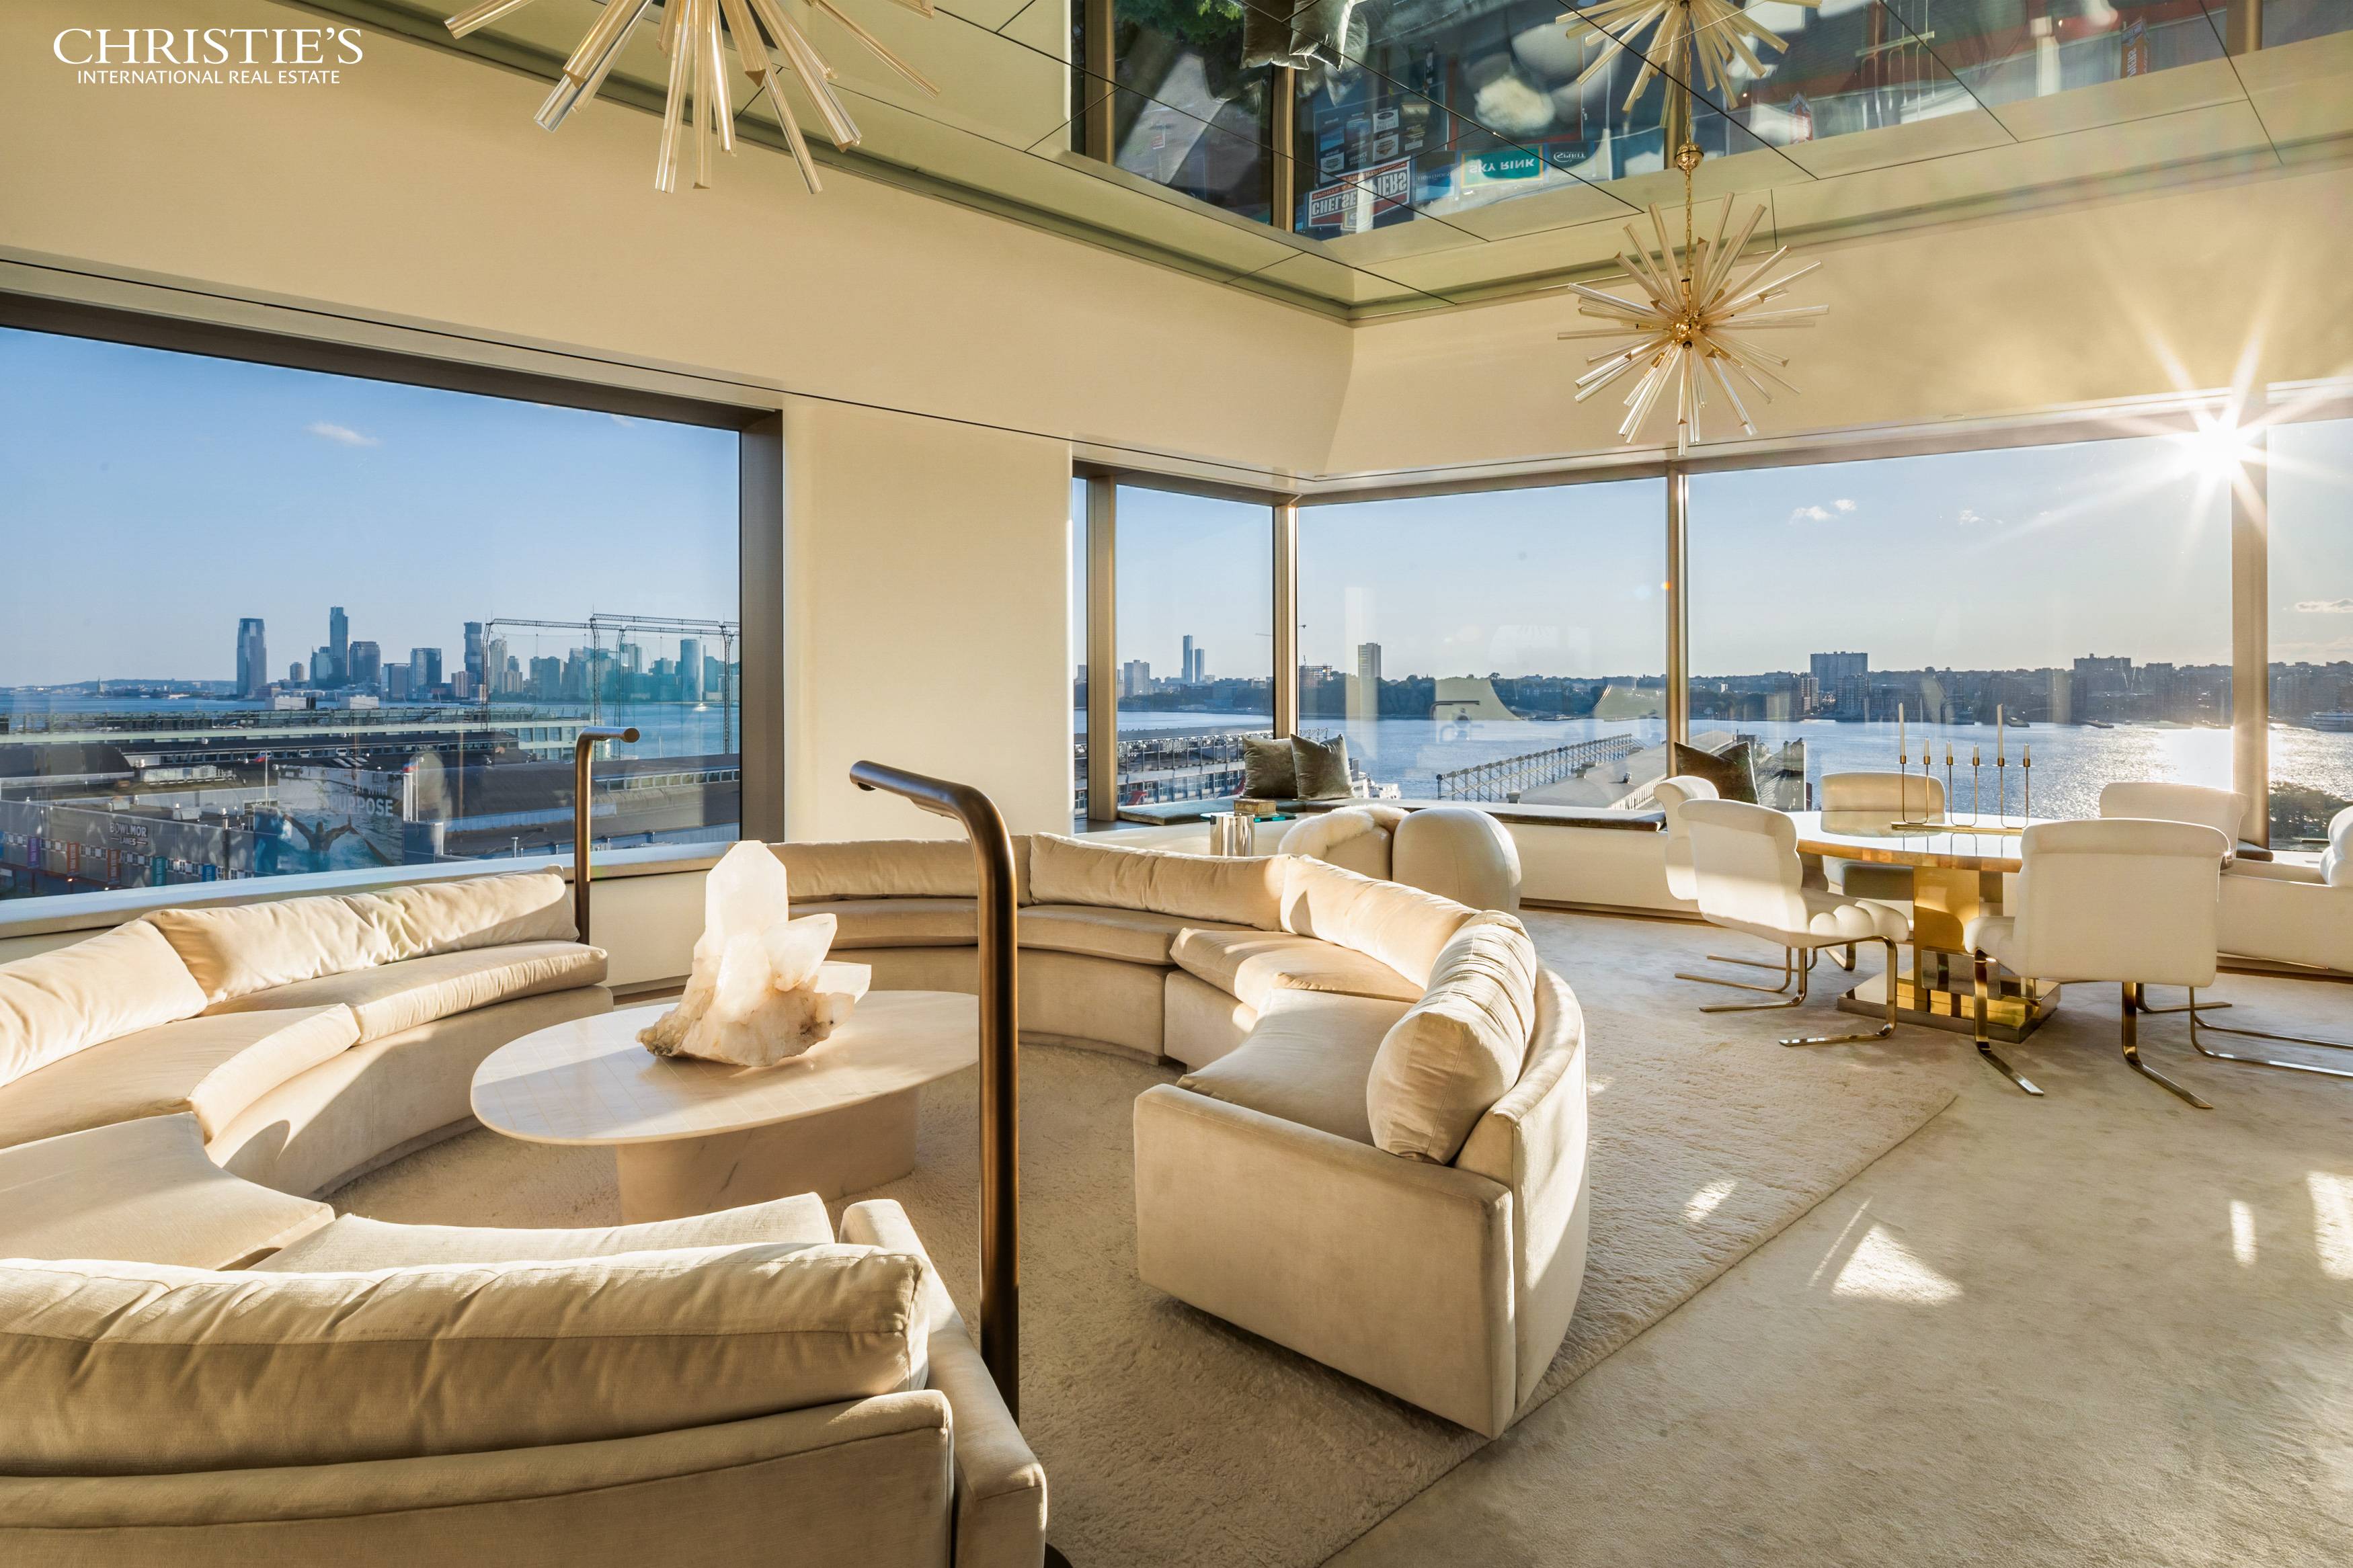 At 2, 425 square feet, this impeccably designed two bedroom, two and a half bathroom home with library is perfectly located on the best block of the West Chelsea waterfront.